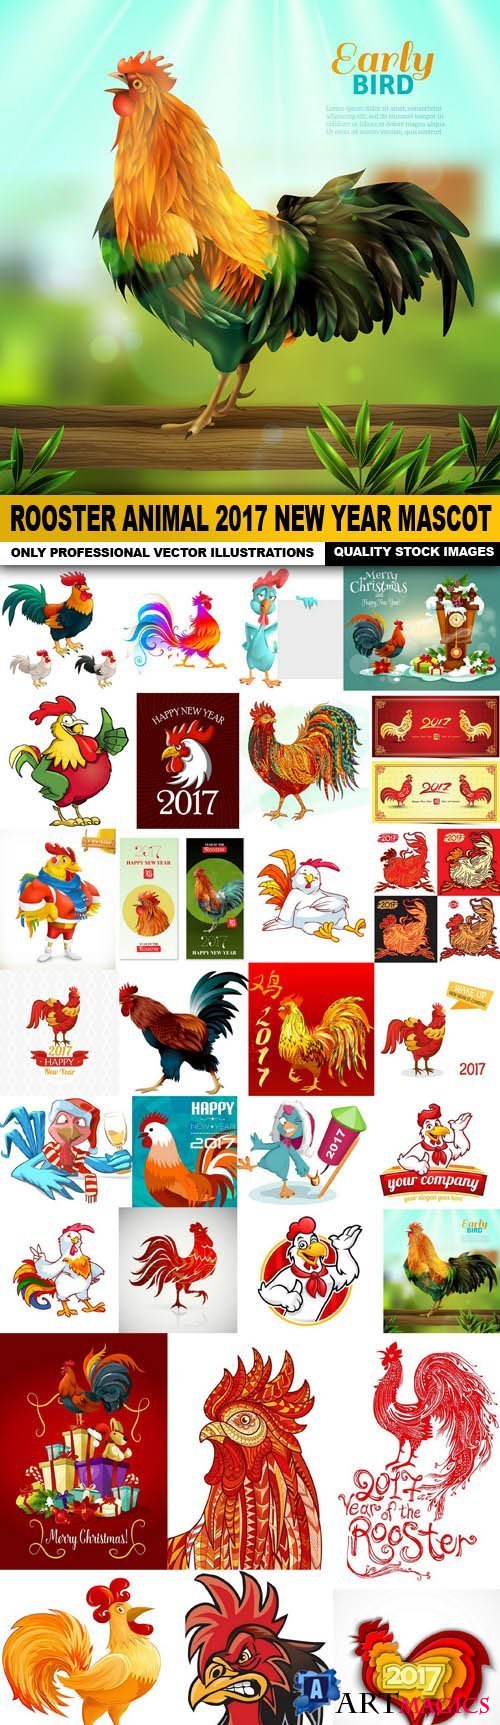 Rooster Animal 2017 New Year Mascot - 31 Vector